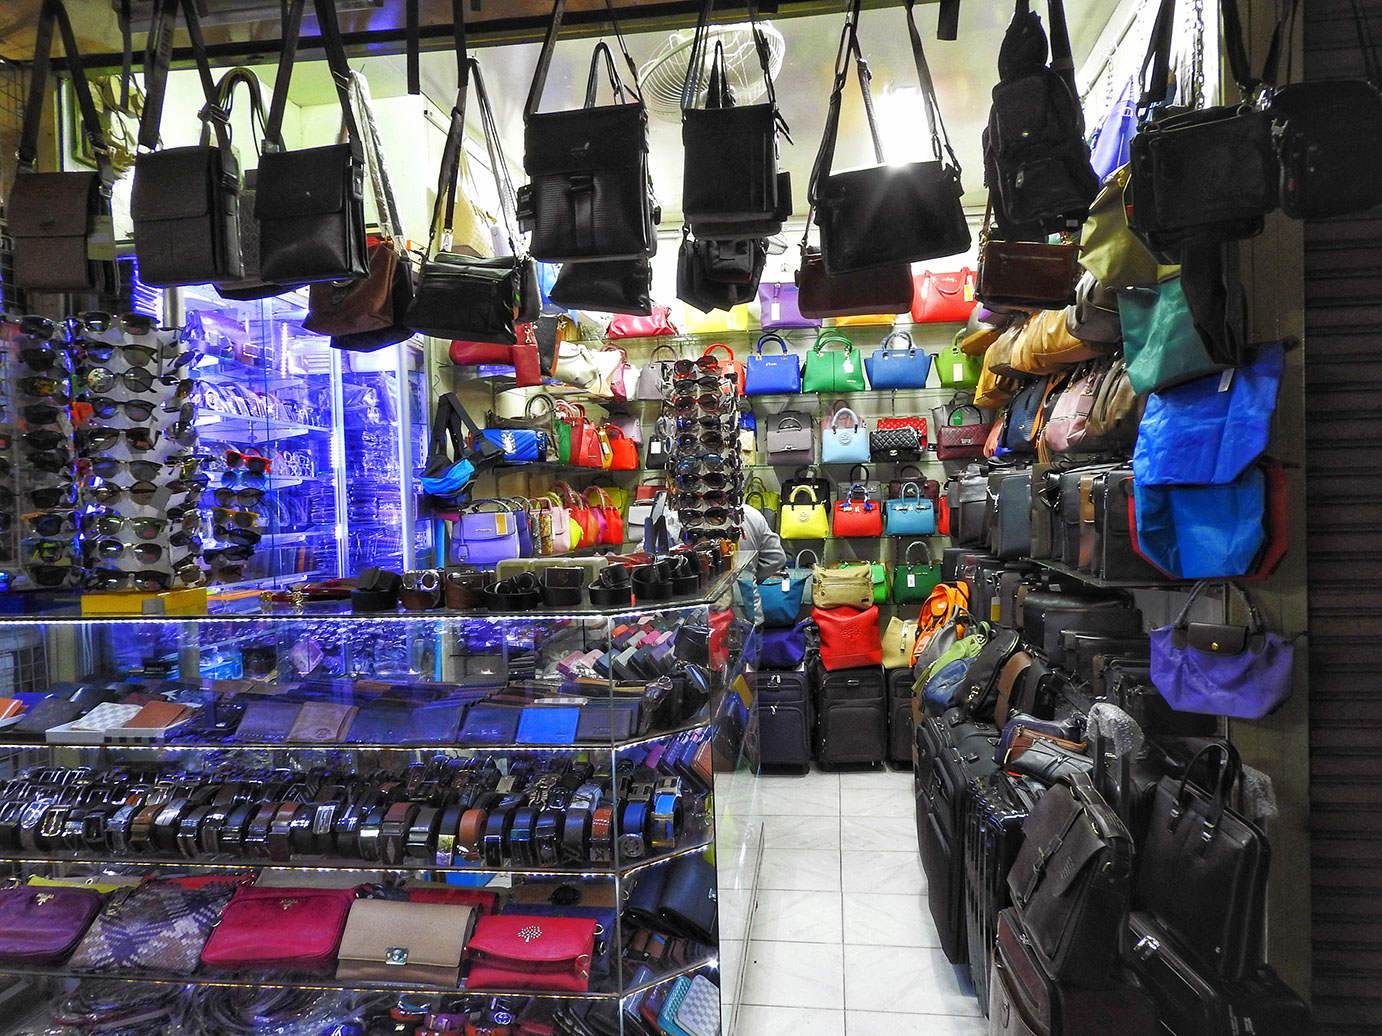 One of the many shops in the Russian Market in Phnom Penh